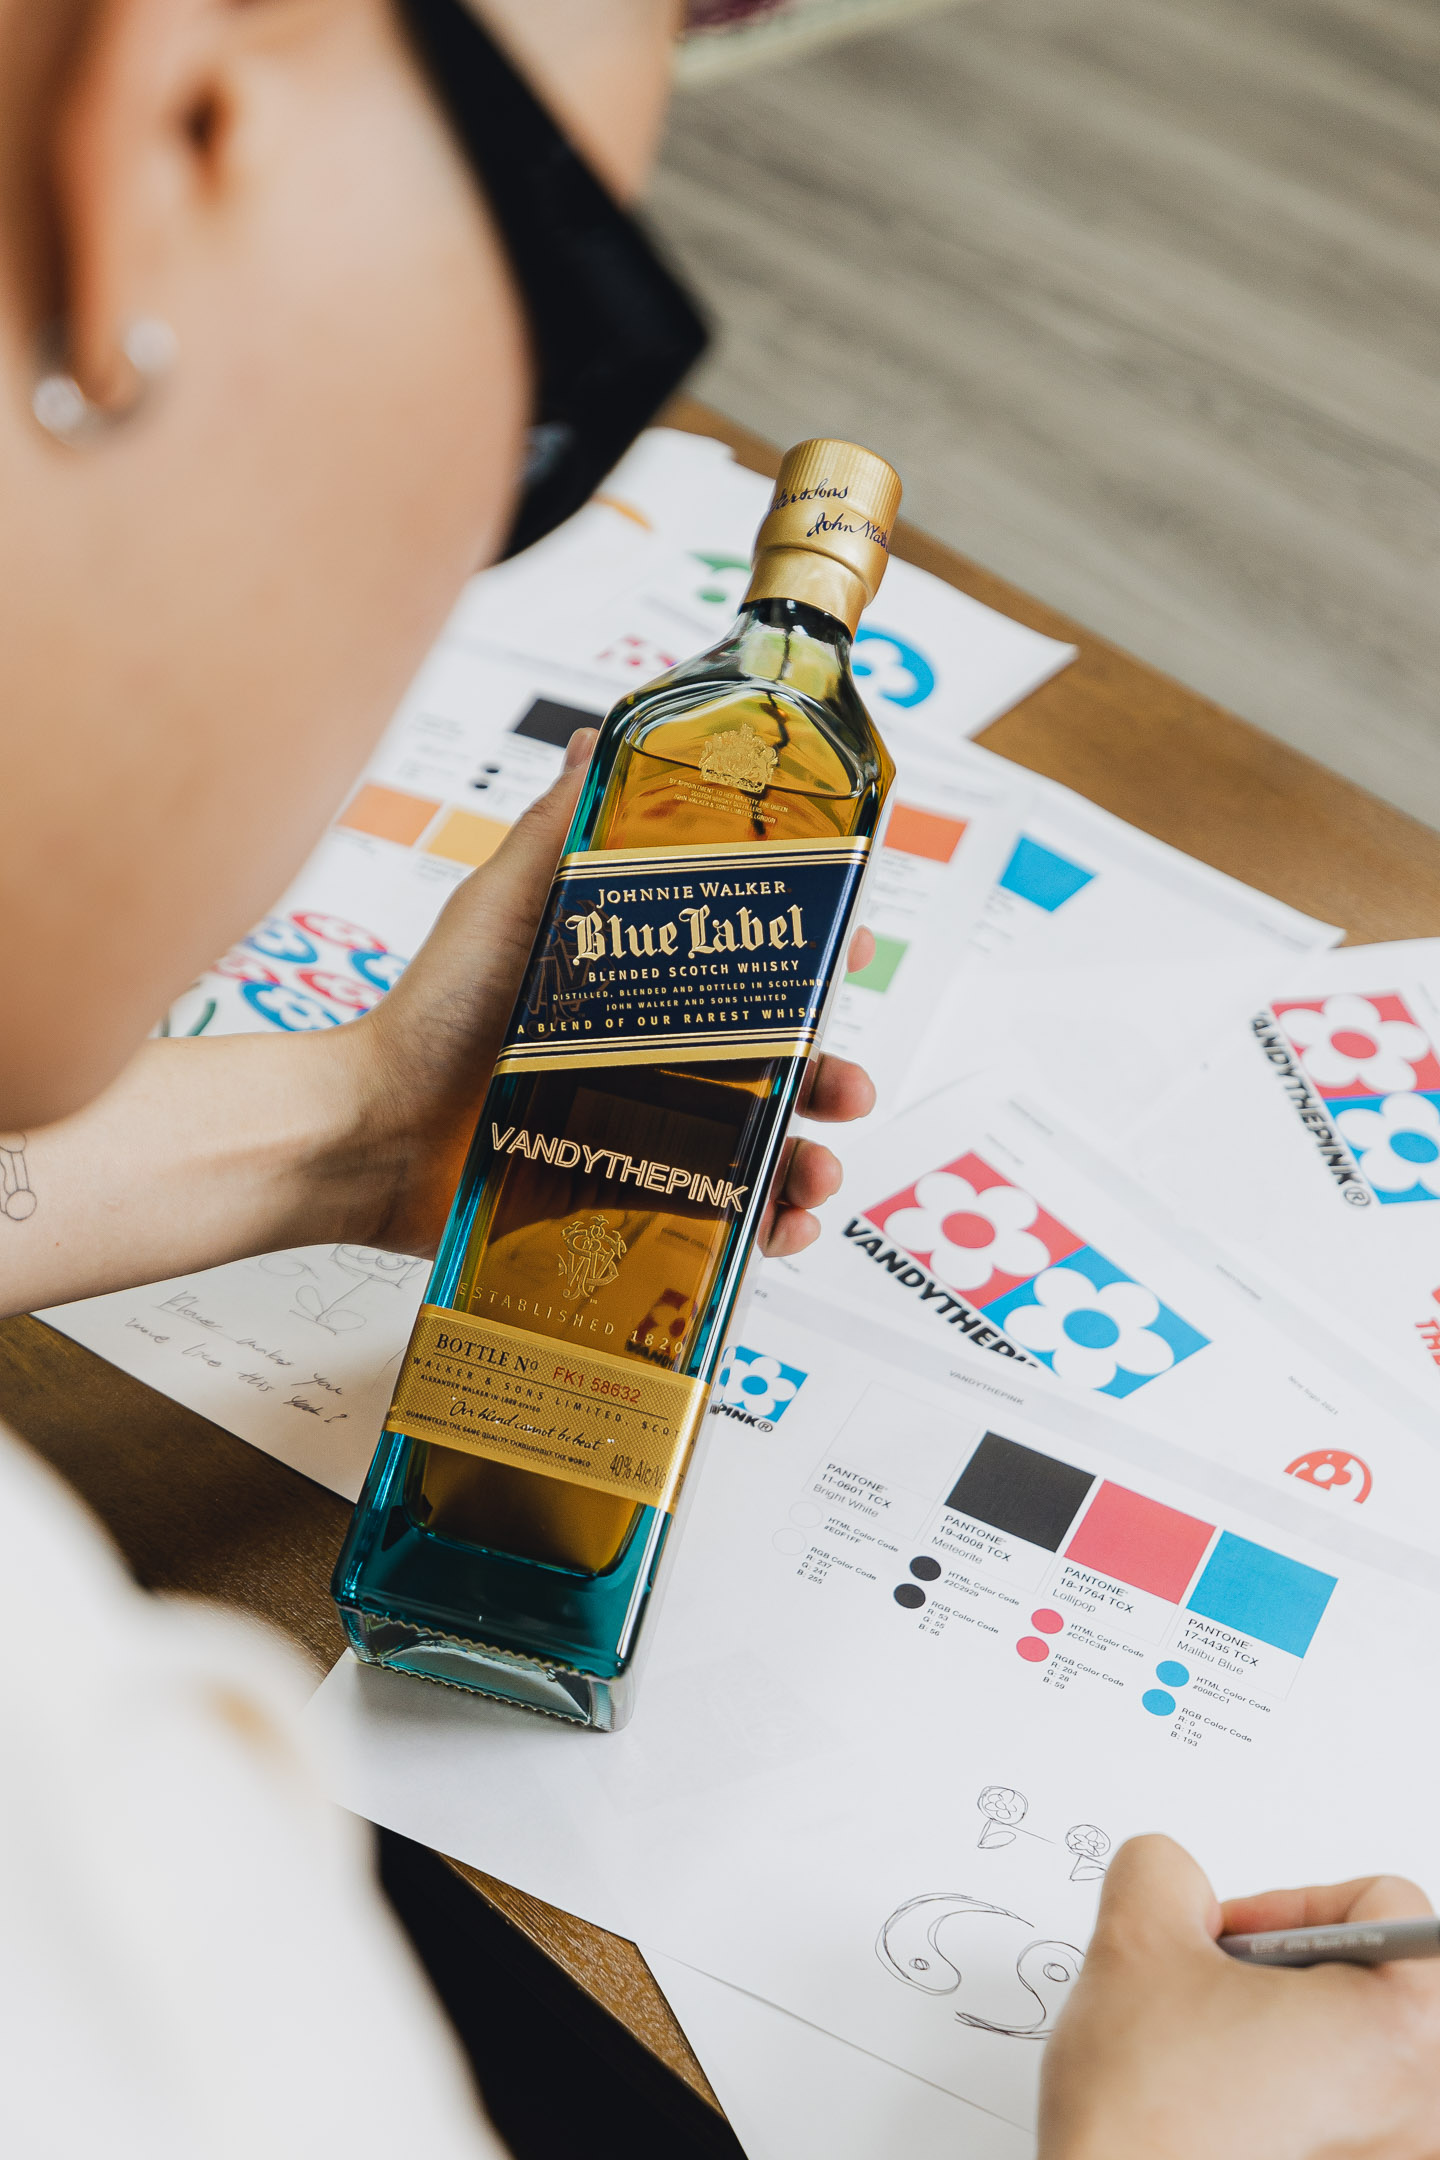 JOHNNIE WALKER COLLABORATES WITH STREETWEAR ARTIST VANDYTHEPINK AND PARTNER 88RISING TO RELEASE THE FIRST JOHNNIE WALKER BLUE LABEL BOTTLE AND NFT DESIGN INFLUENCED BY A COMMUNITY VOTE